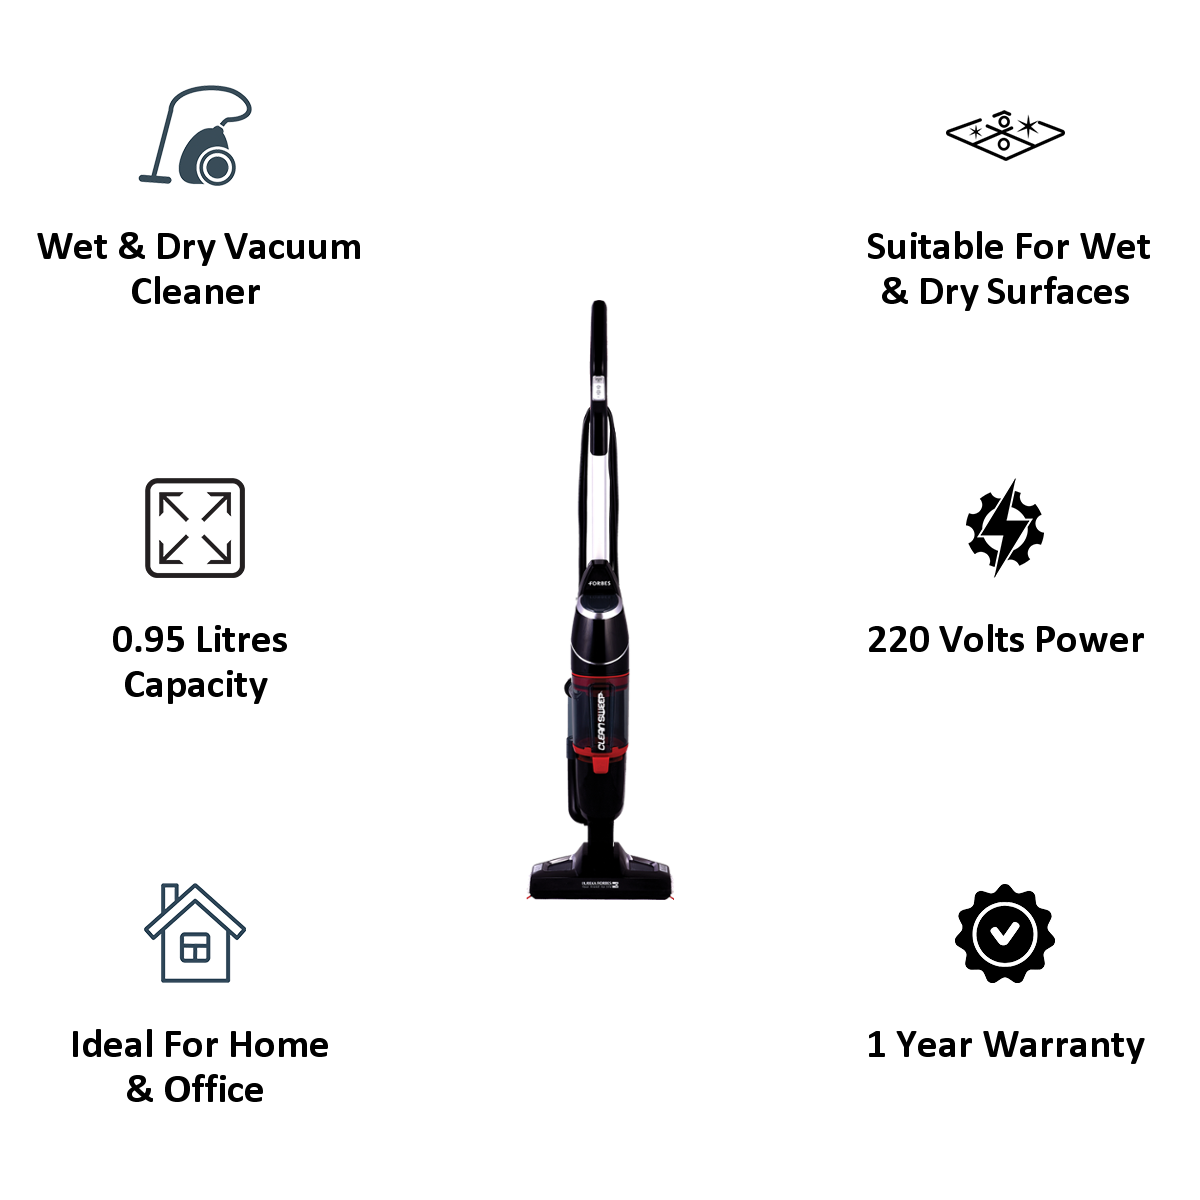 Eureka Forbes Clean Sweep 0.5 Litres Wet & Dry Vacuum Cleaner (GFCDCLNSWP0000, Red/Black)